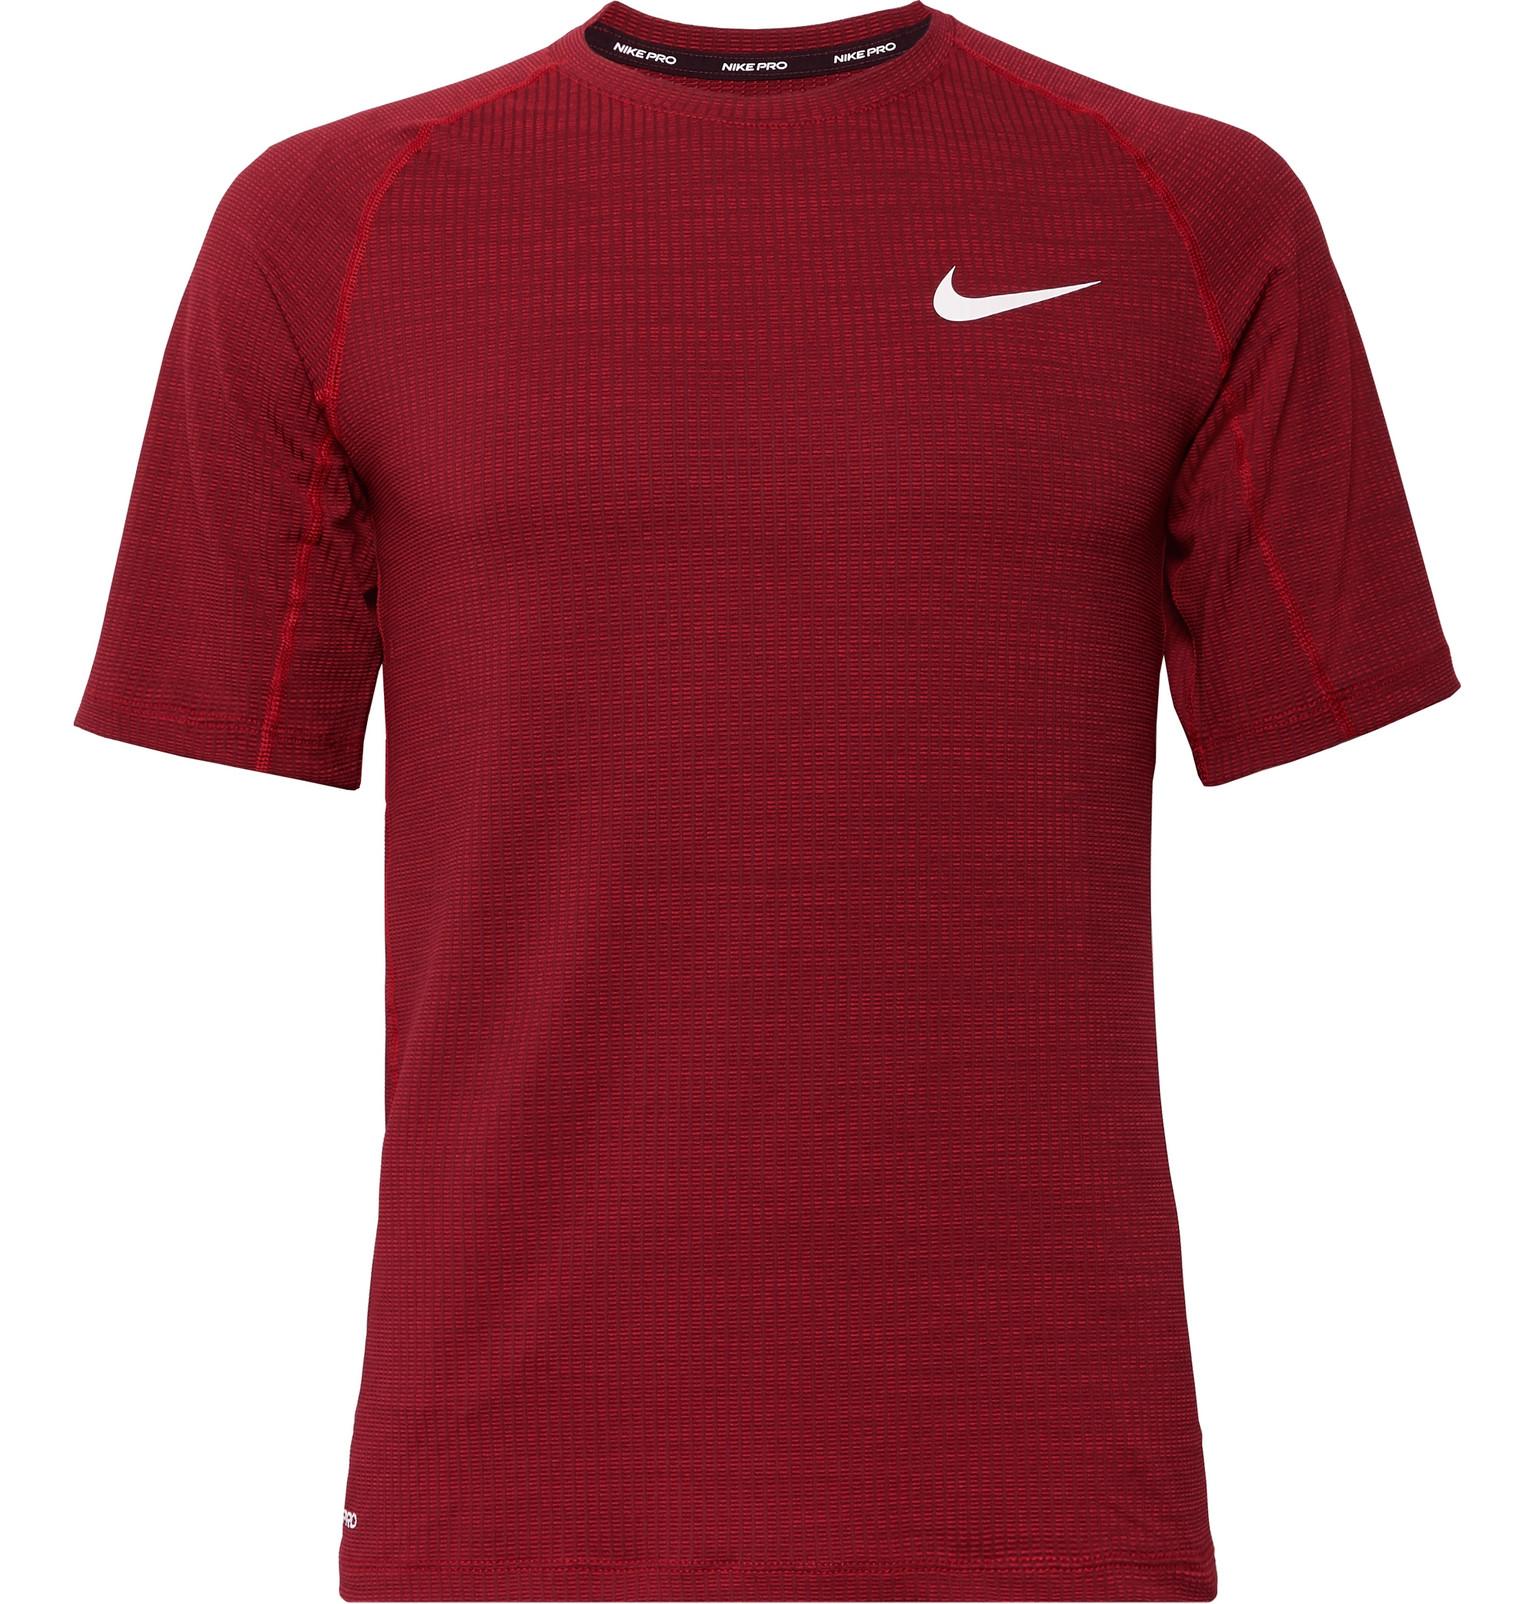 Nike Pro Slim-fit Dri-fit T-shirt in Red for Men - Lyst